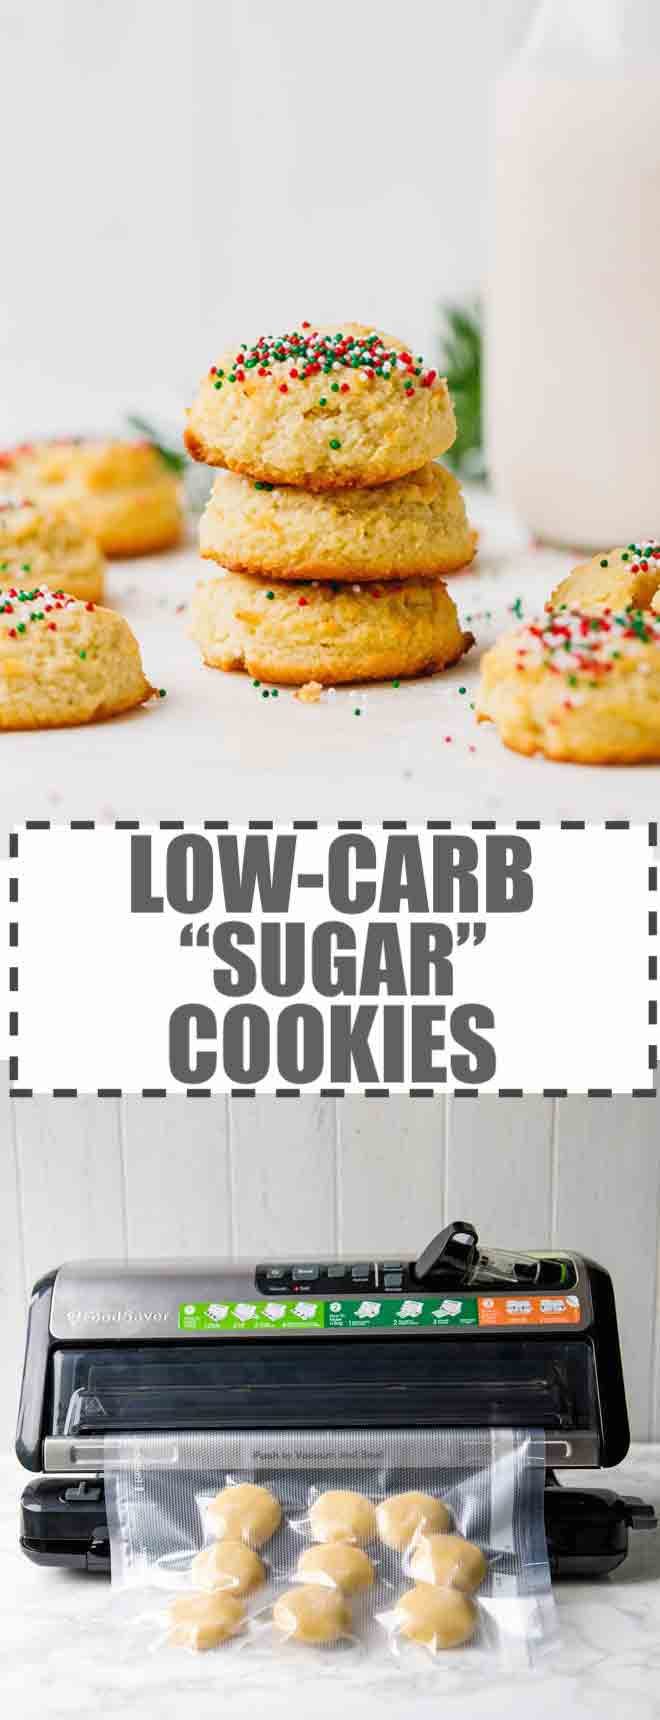 LOW-CARB SUGAR COOKIES WITH SPRINKLES ON TOP OF EACH OTHER ON PARCHMENT PAPER